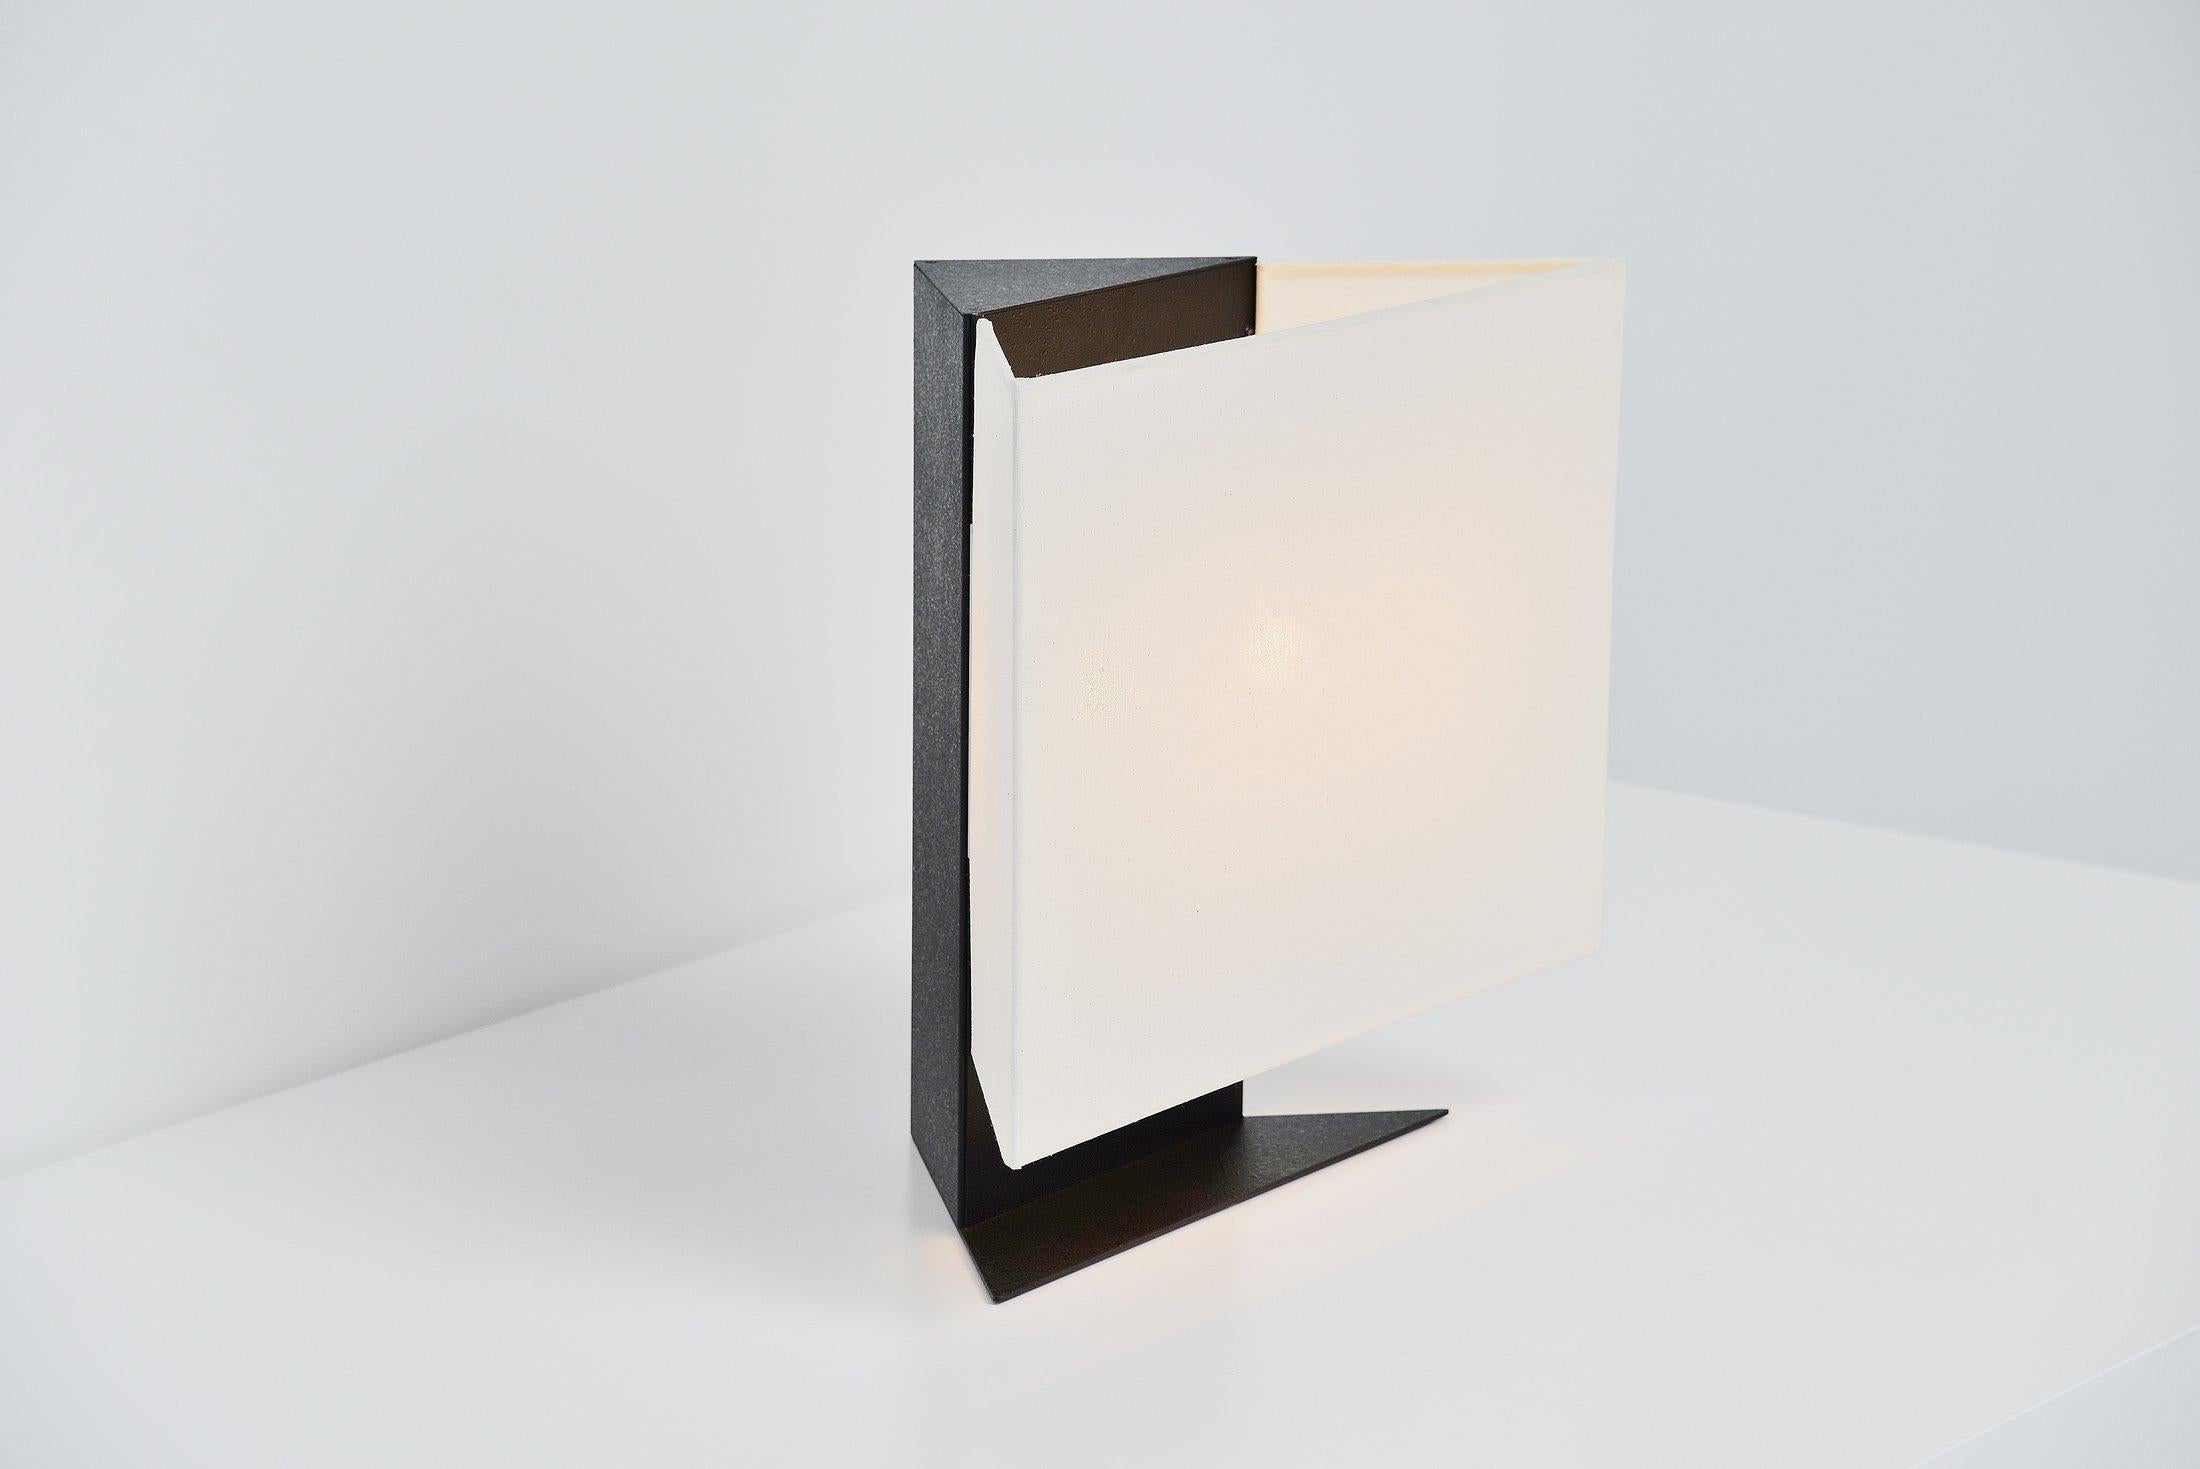 Cold-Painted Cini Boeri Accademia Table Lamp Artemide, Italy, 1978